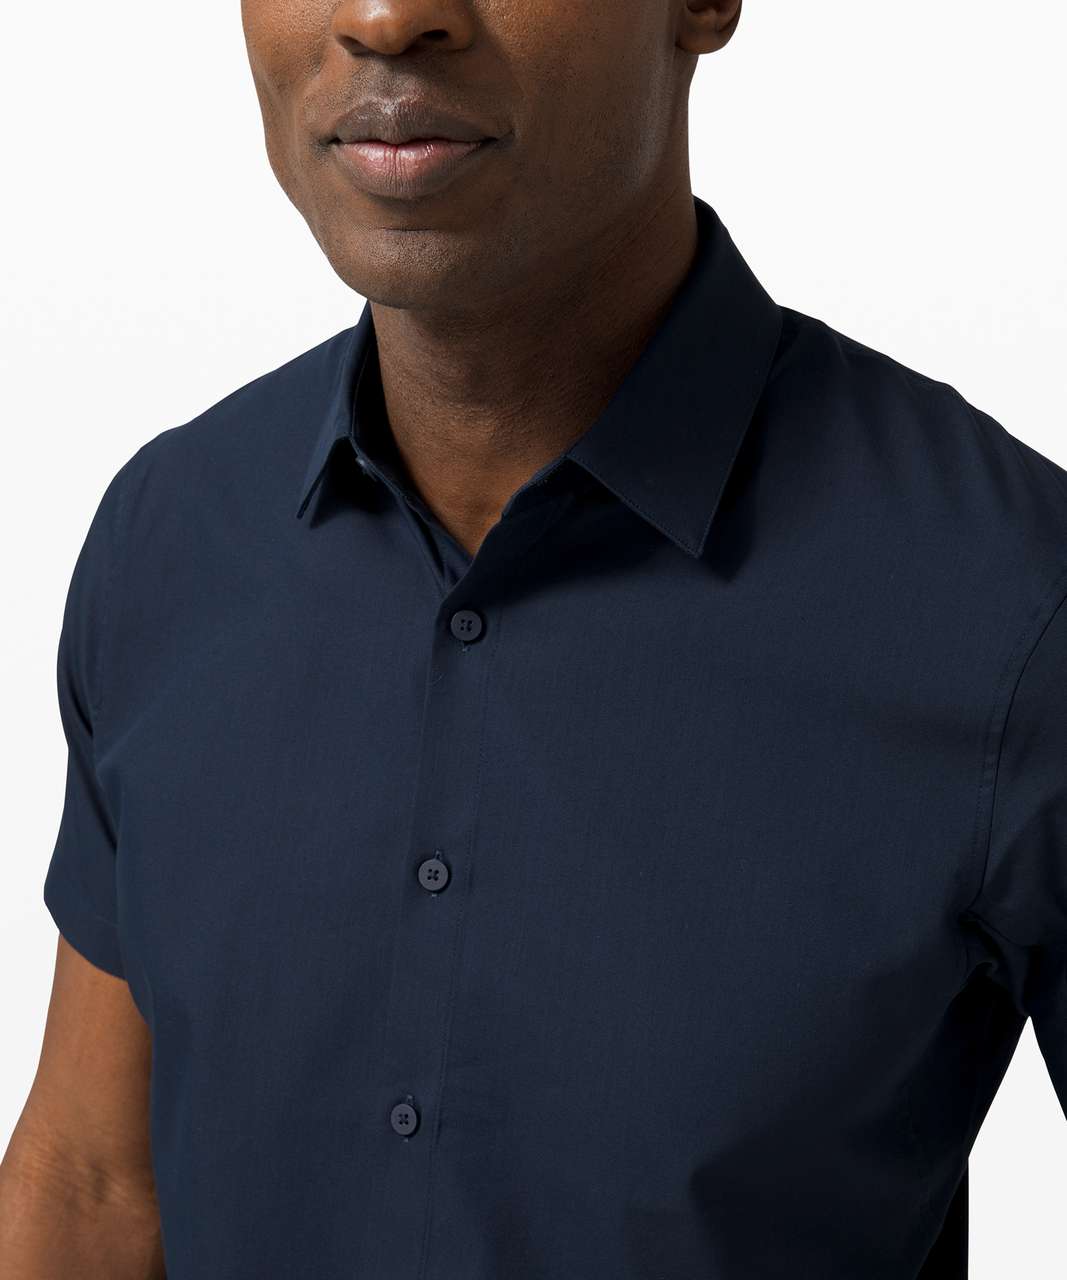 Lululemon Down to the Wire Slim Fit Short Sleeve - True Navy